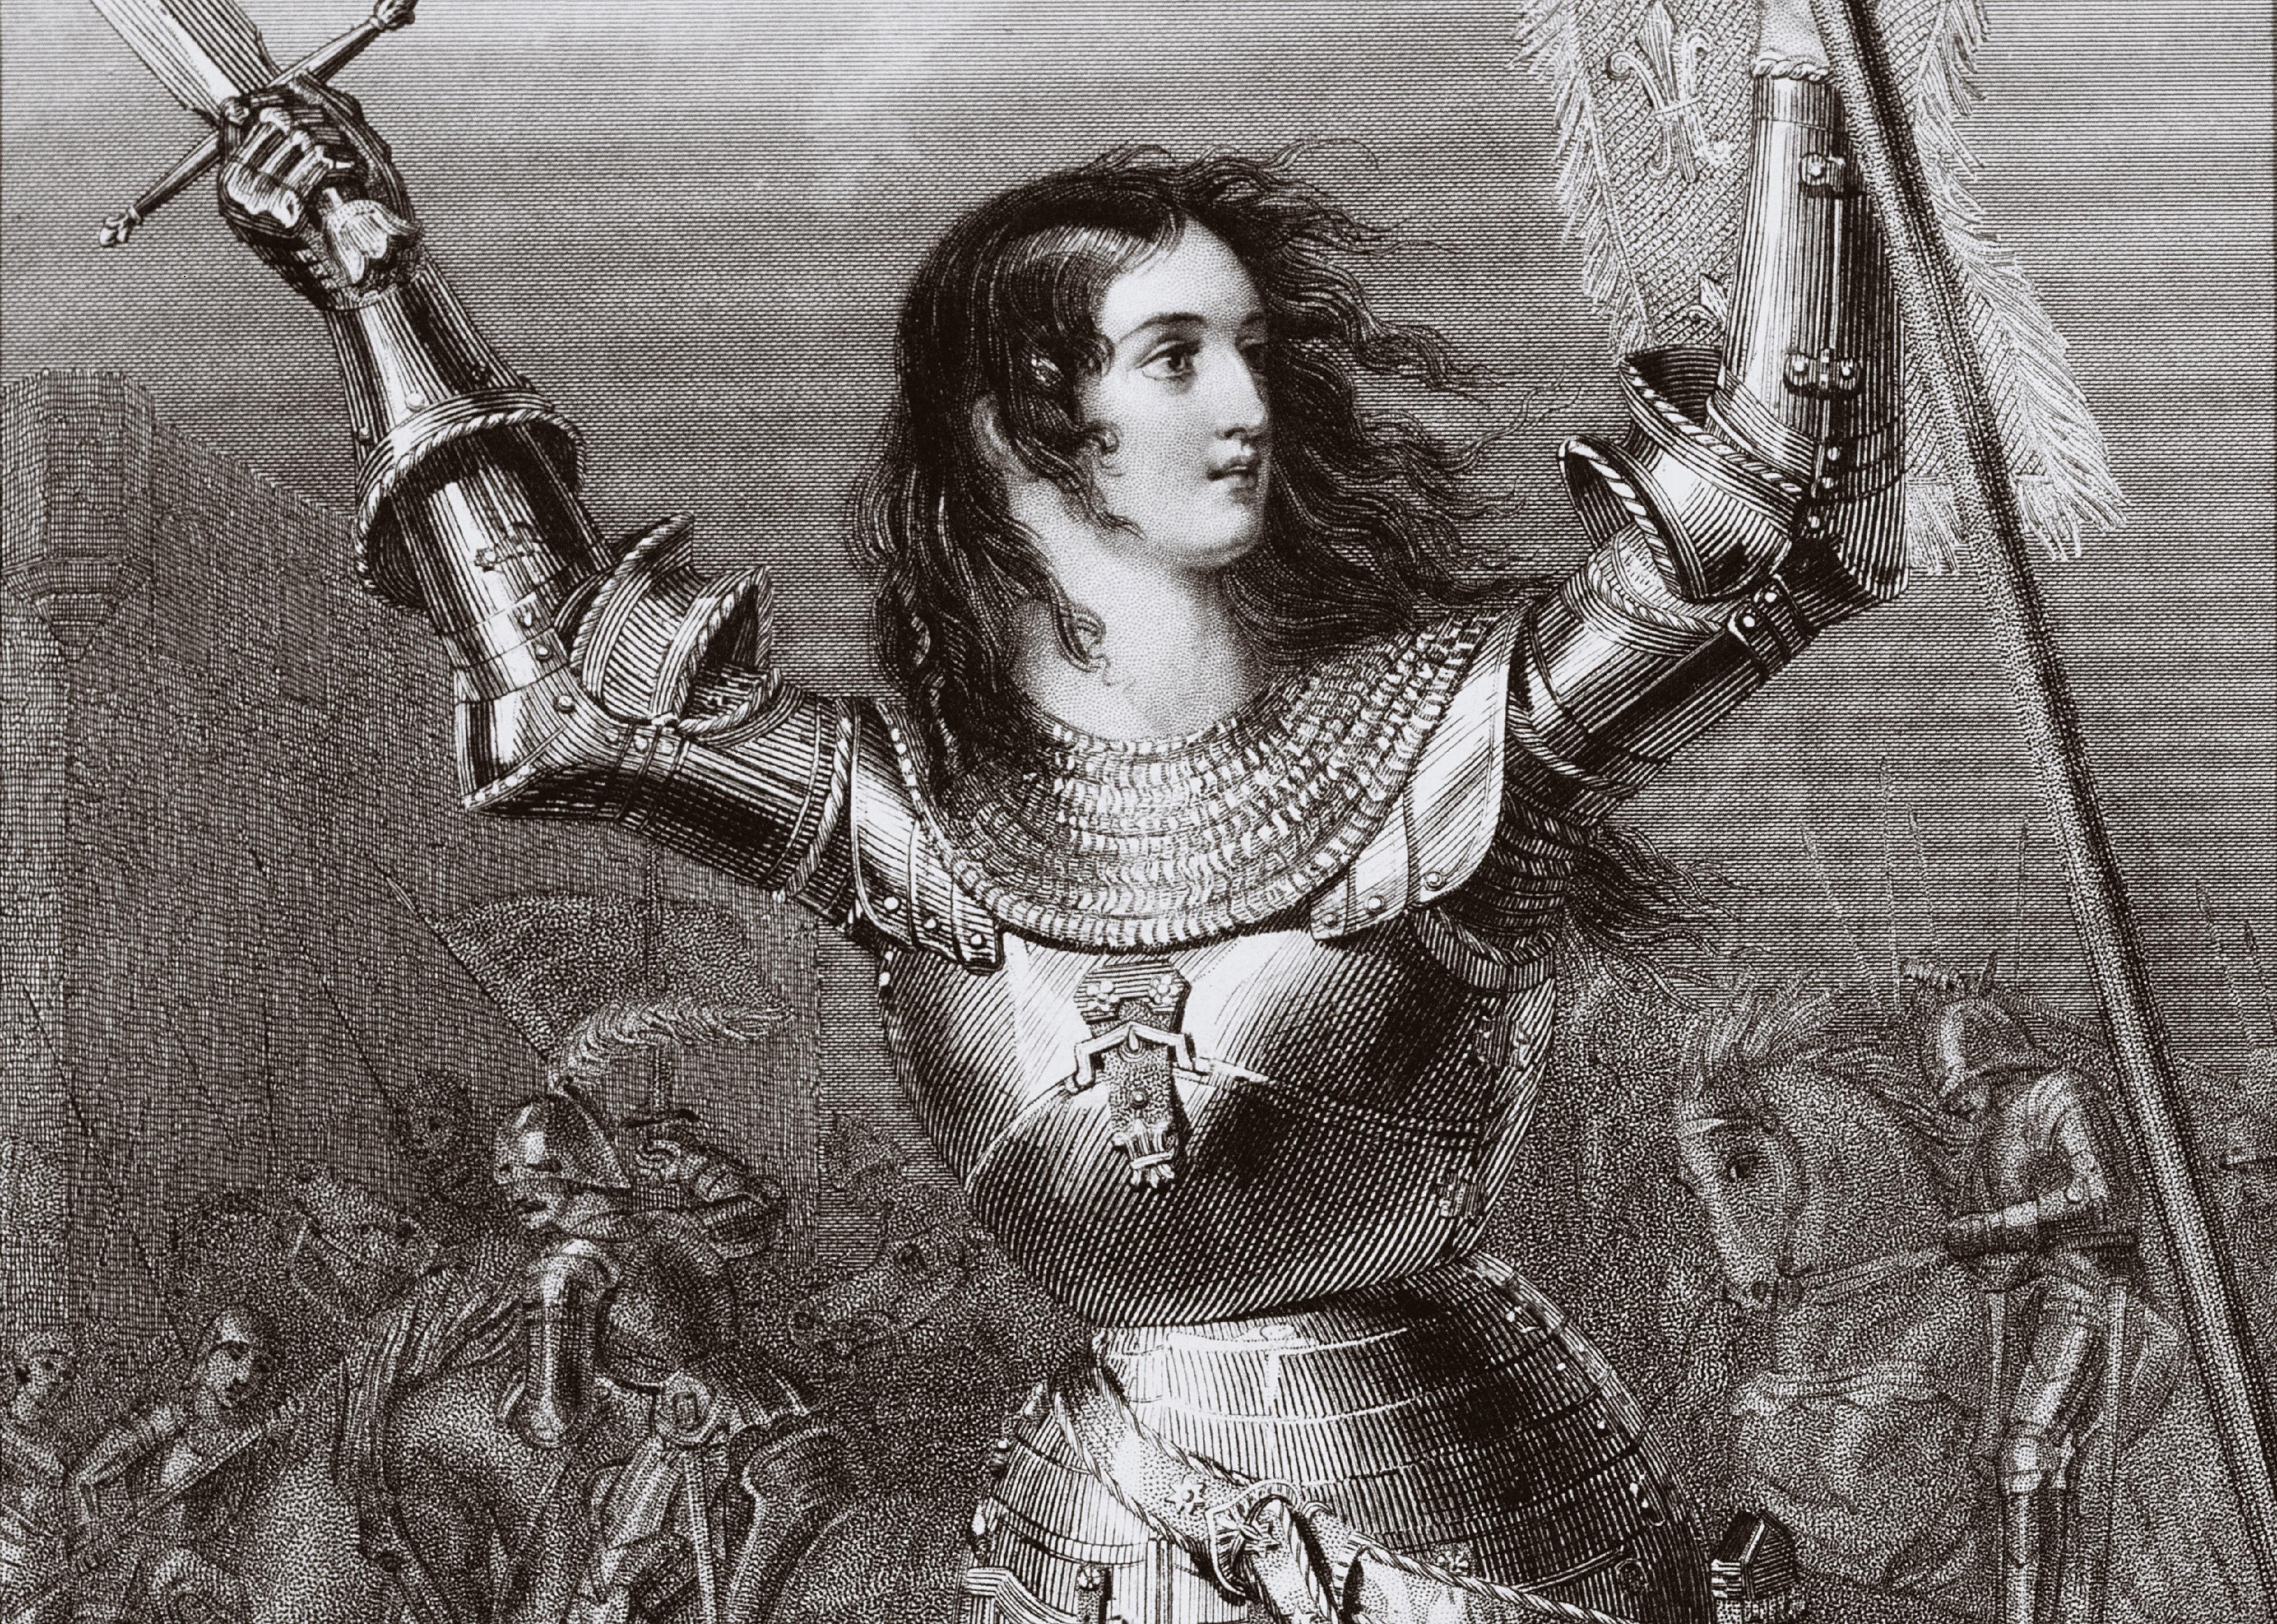 A drawing of Joan of Arc in armour with a sword.